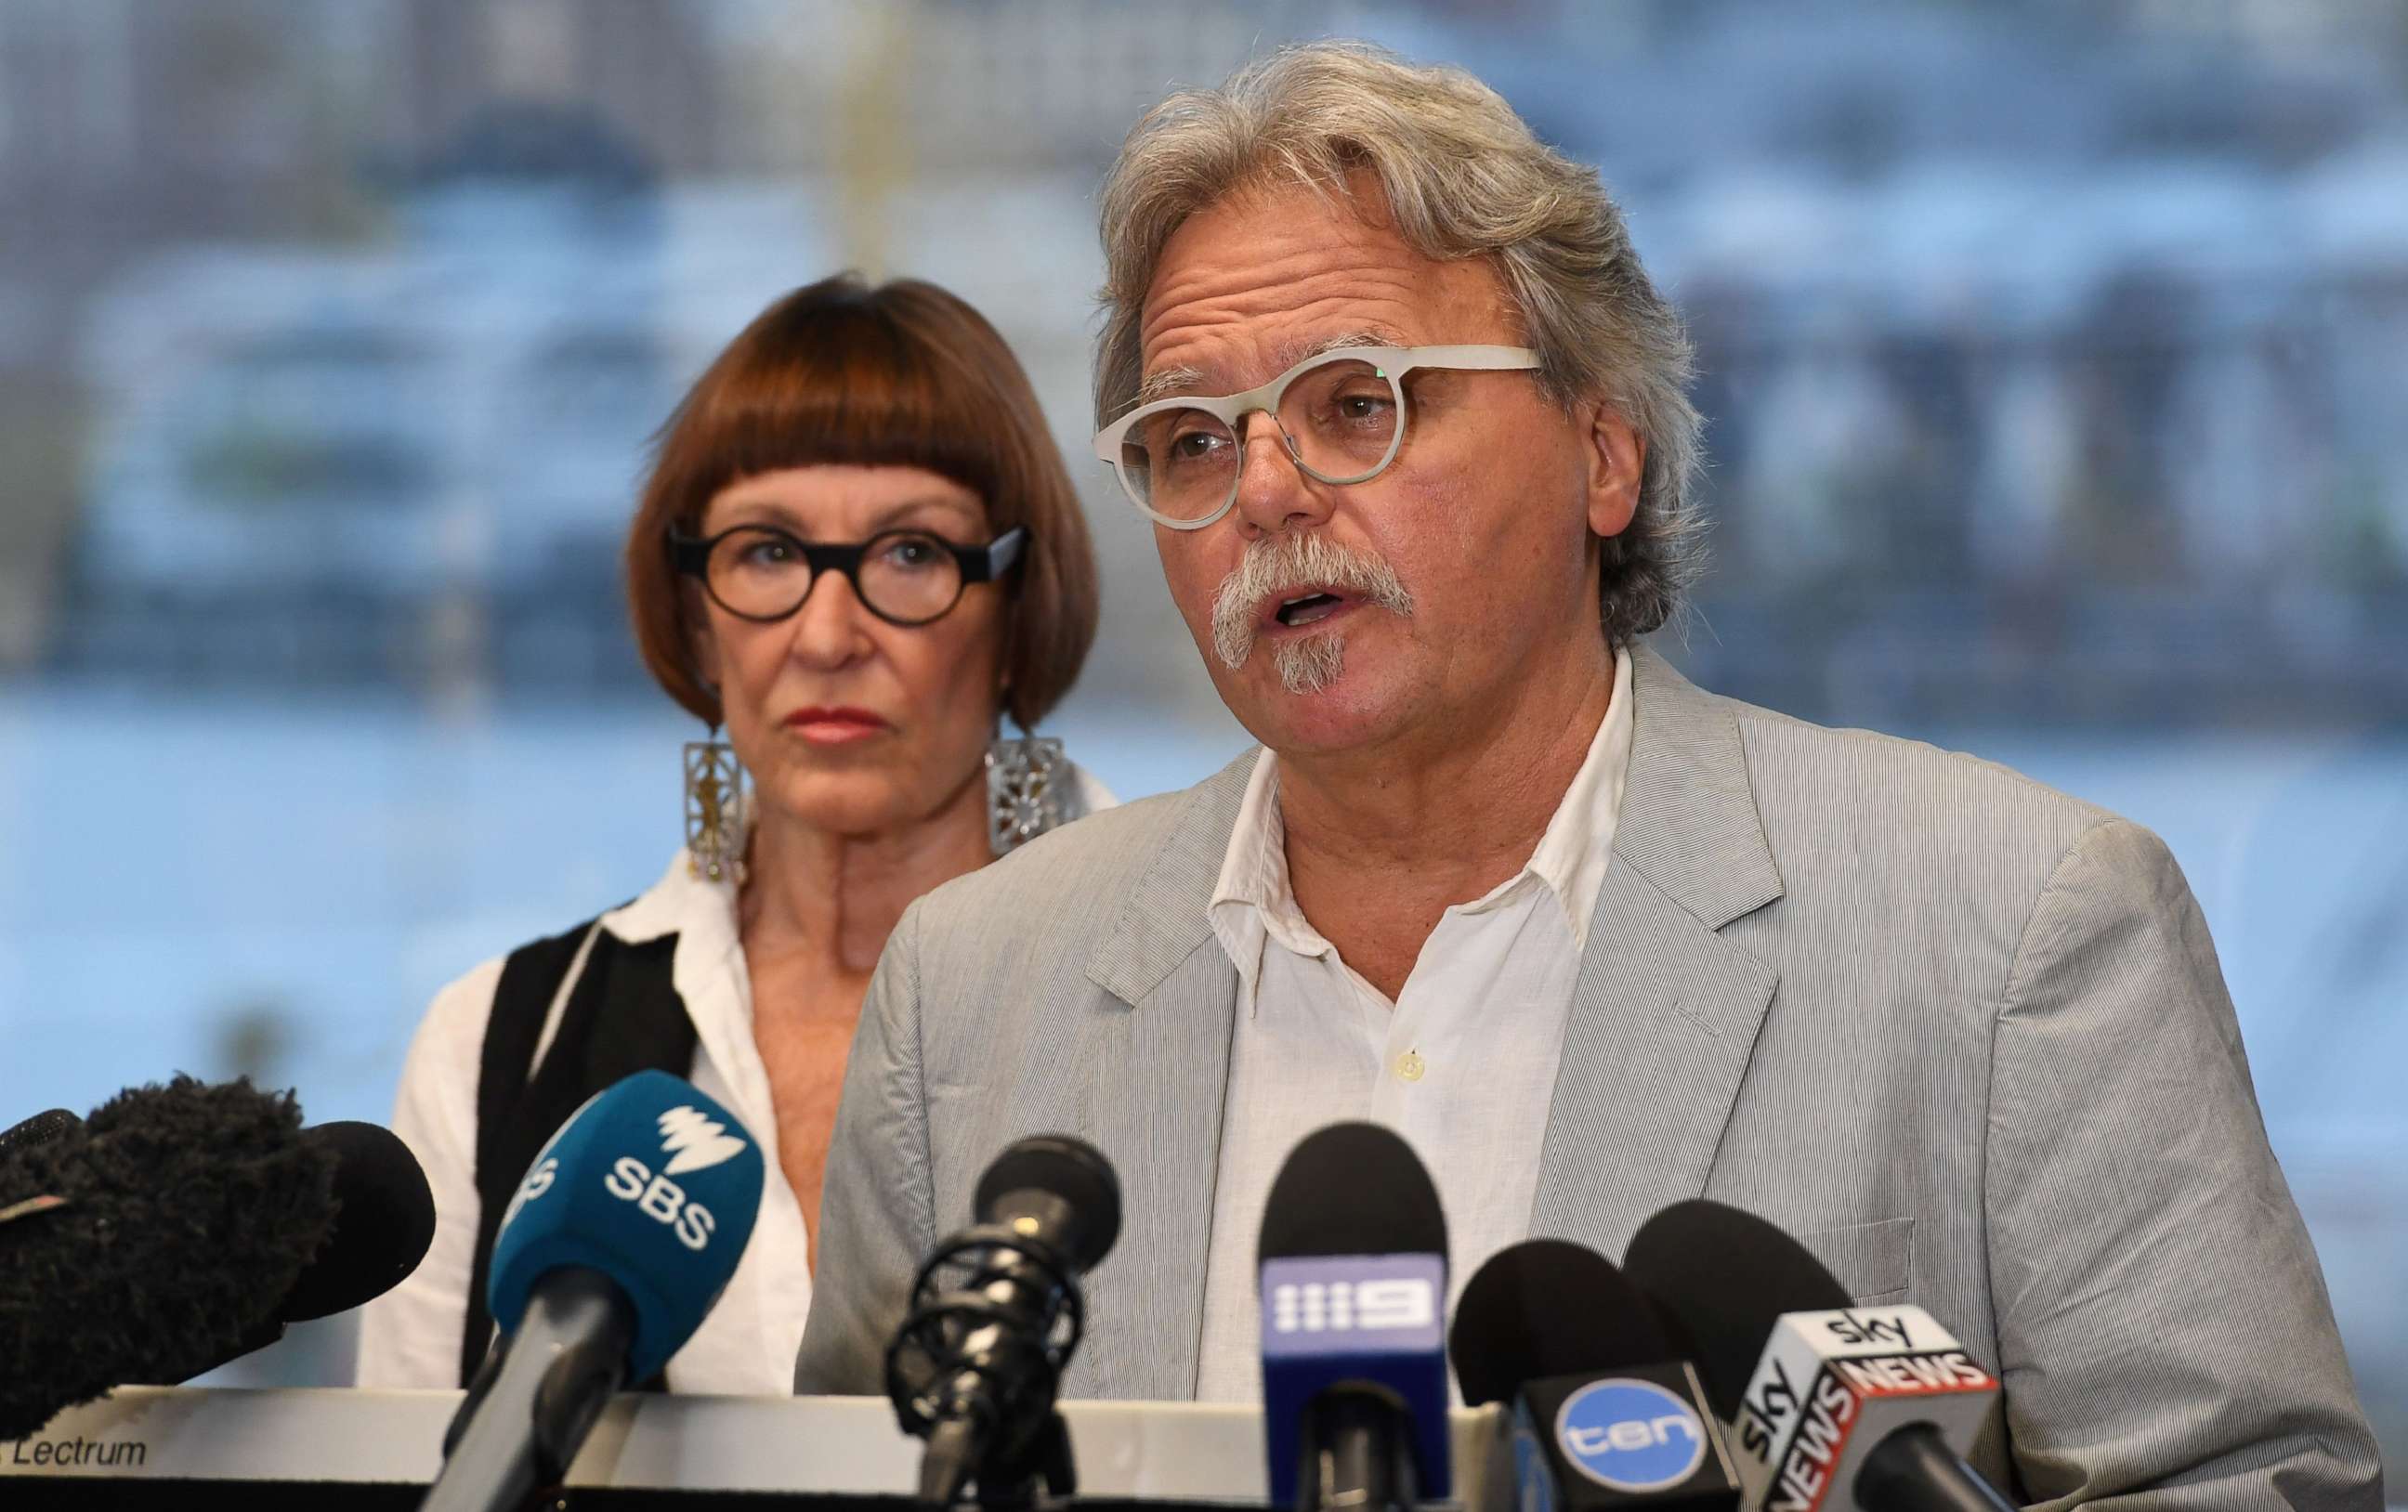 PHOTO: John Ruszczyk, the father of Australian woman Justine Damond who was killed in a police shooting in the U.S., is accompanied by his wife Maryan Heffernan as he speaks at a press conference in Sydney on Dec. 21, 2017.